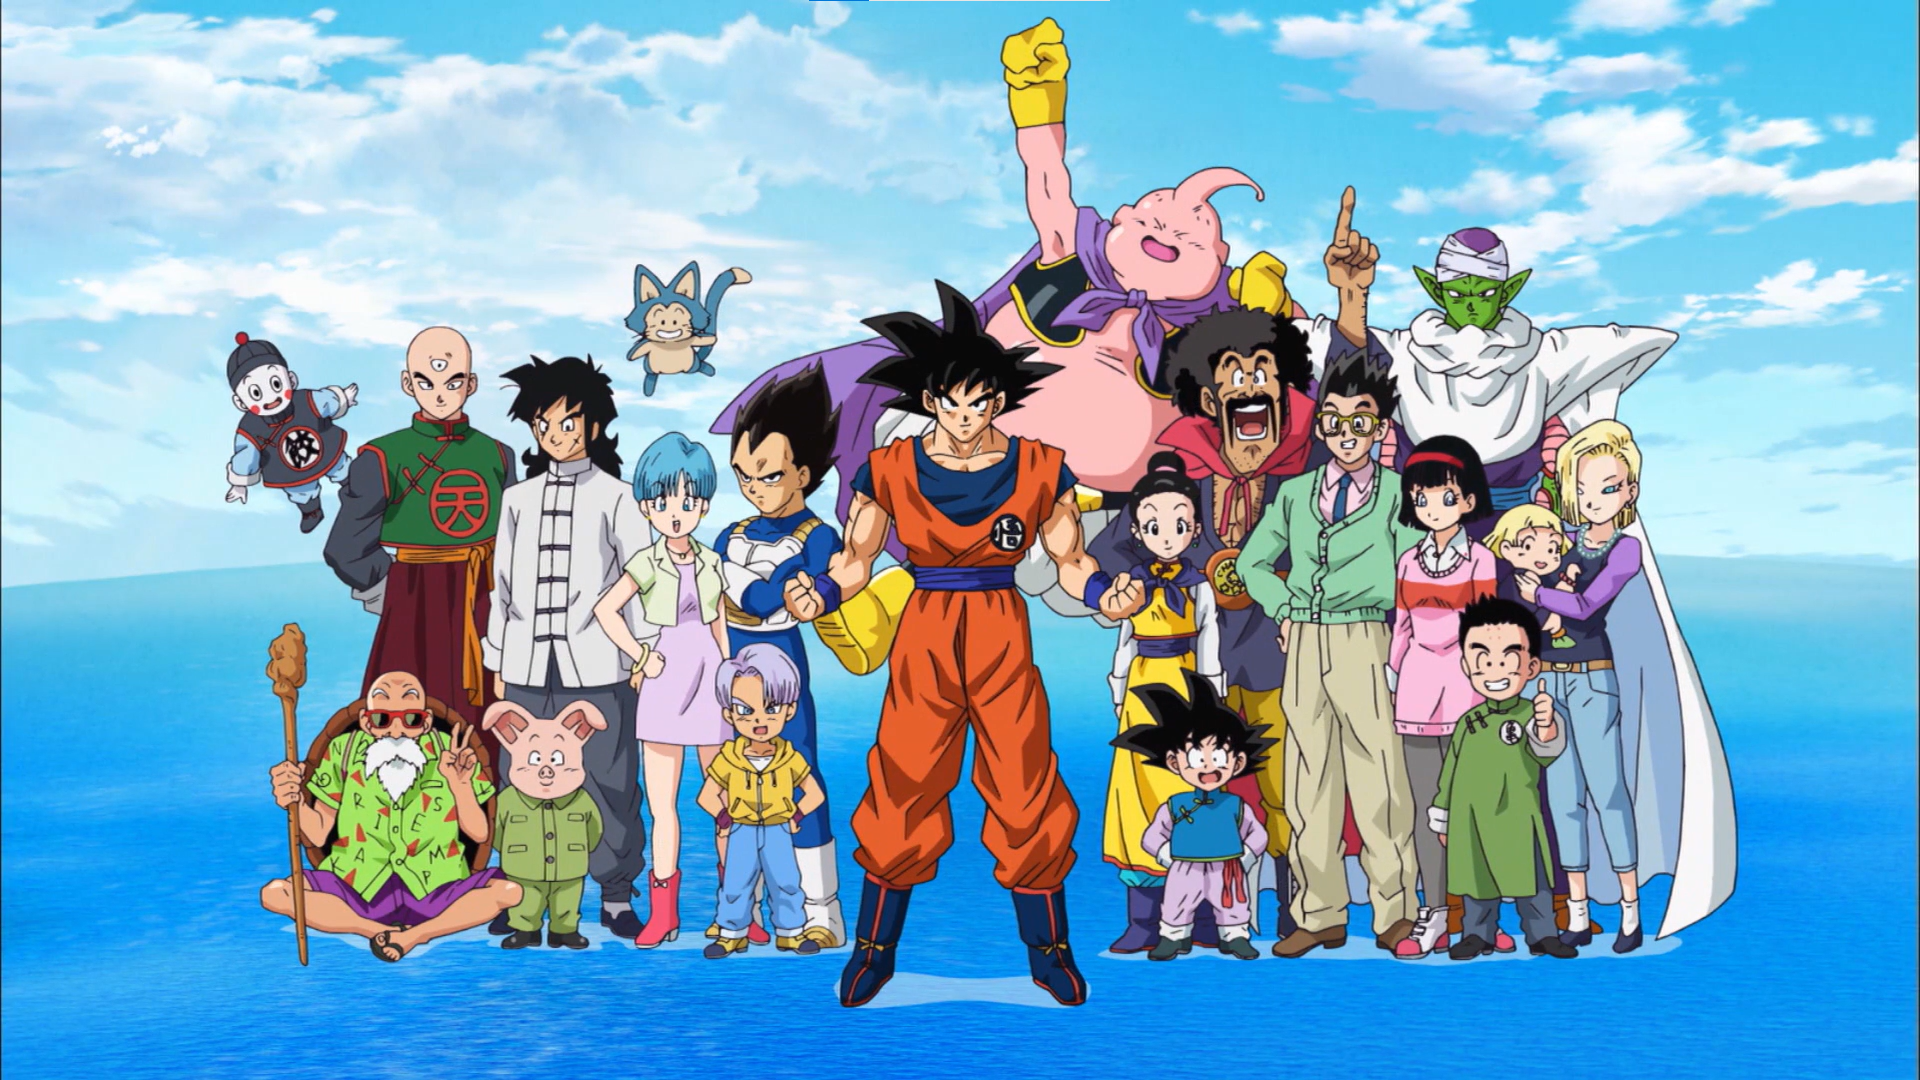 Dragon Ball: How to watch the classic anime franchise in chronological or  release order | Popverse